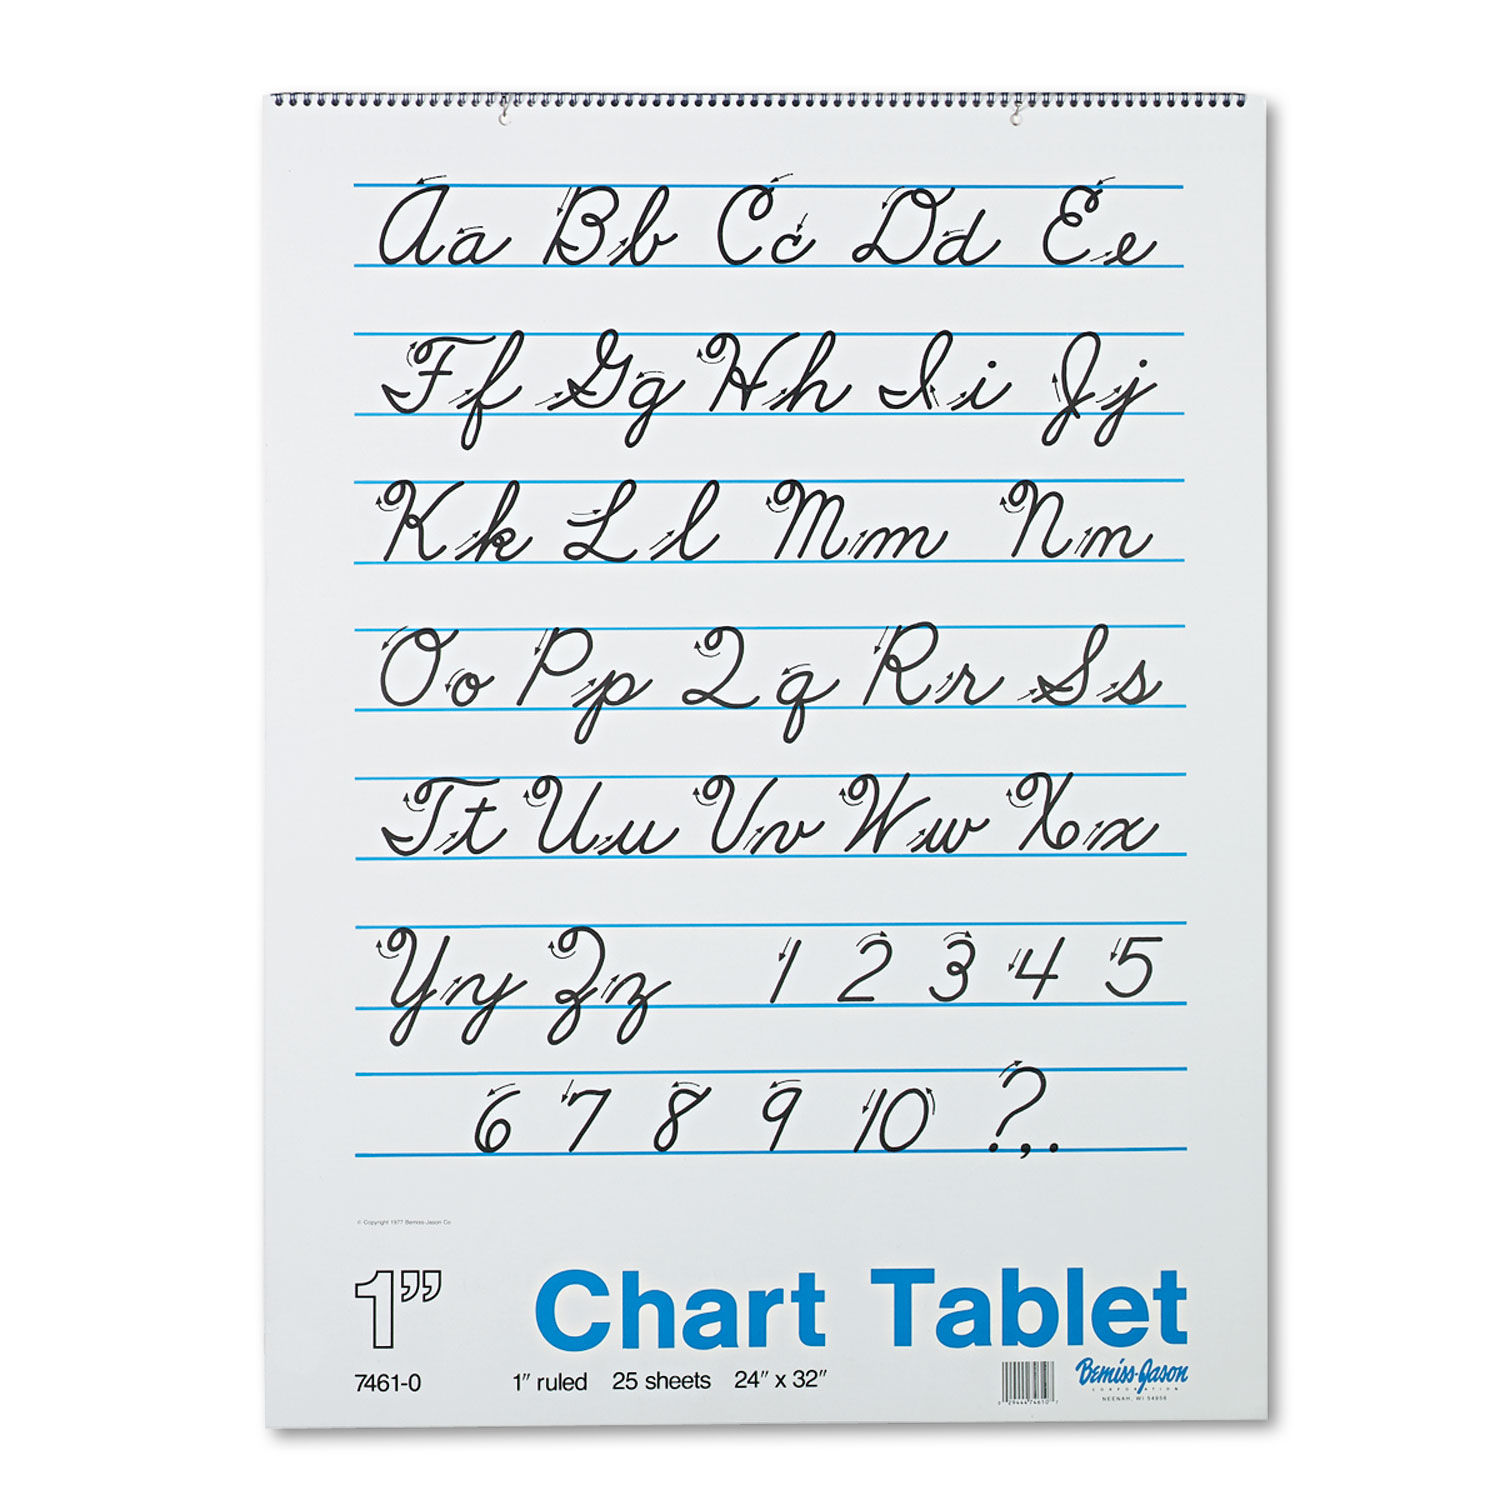 Chart Tablets Presentation Format (1" Rule), 24 x 32, White, 25 Sheets